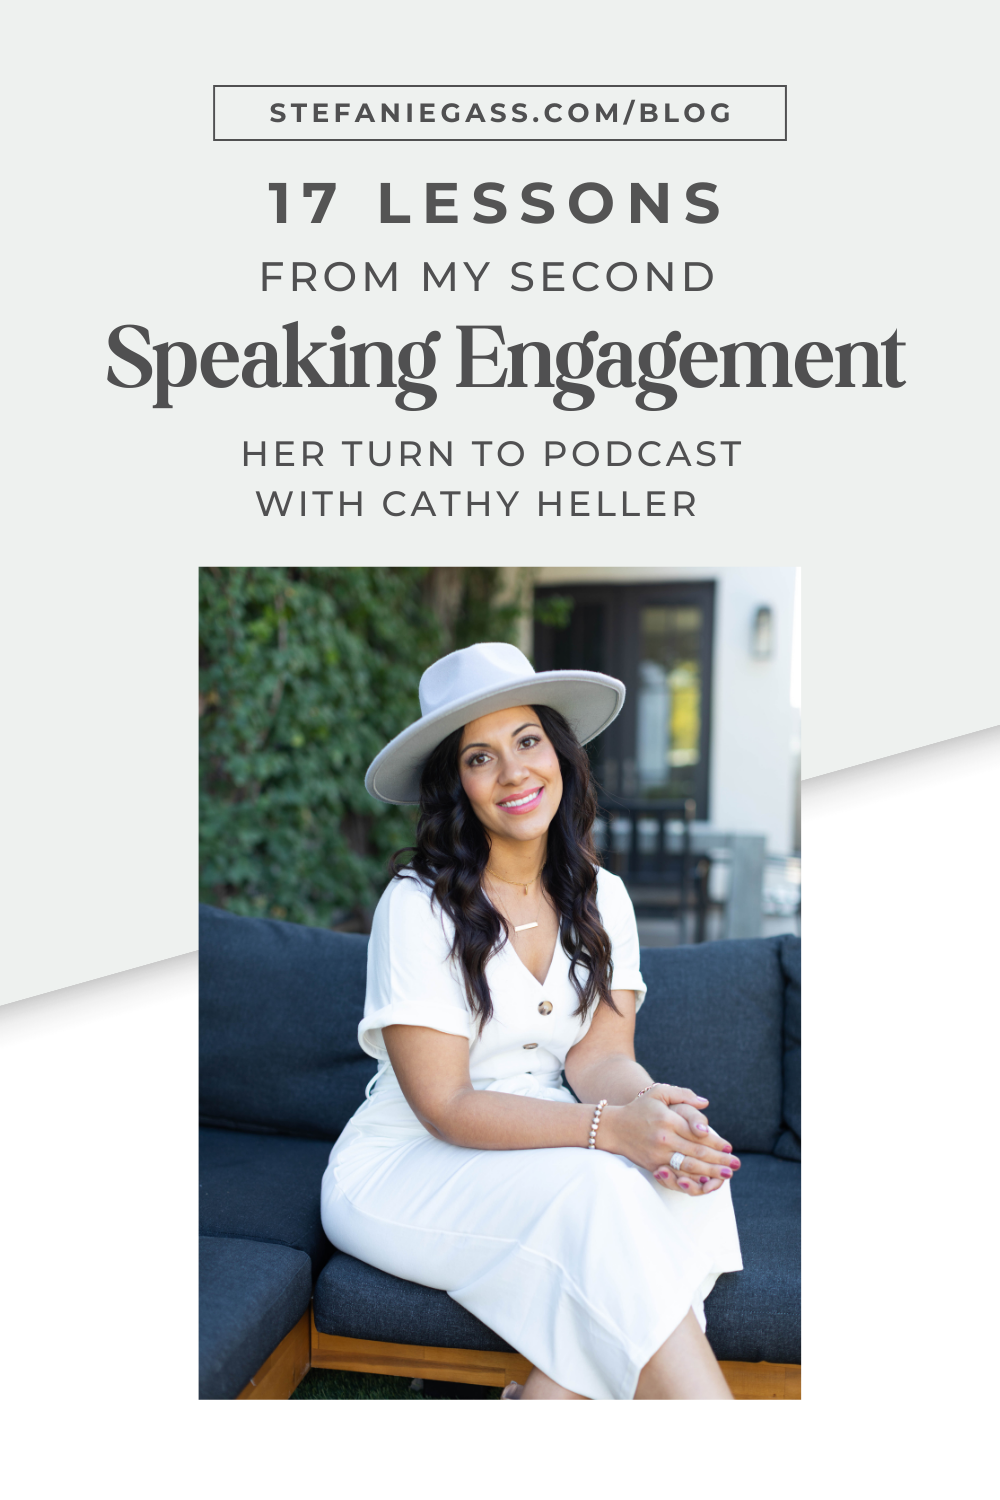 a brown haired woman wearing a hat smiling while sitting on a blue couch, Text reads: 17 Lessons from My Second Speaking Engagement Her Turn to Podcast with Cathy Heller, Stefanie Gass